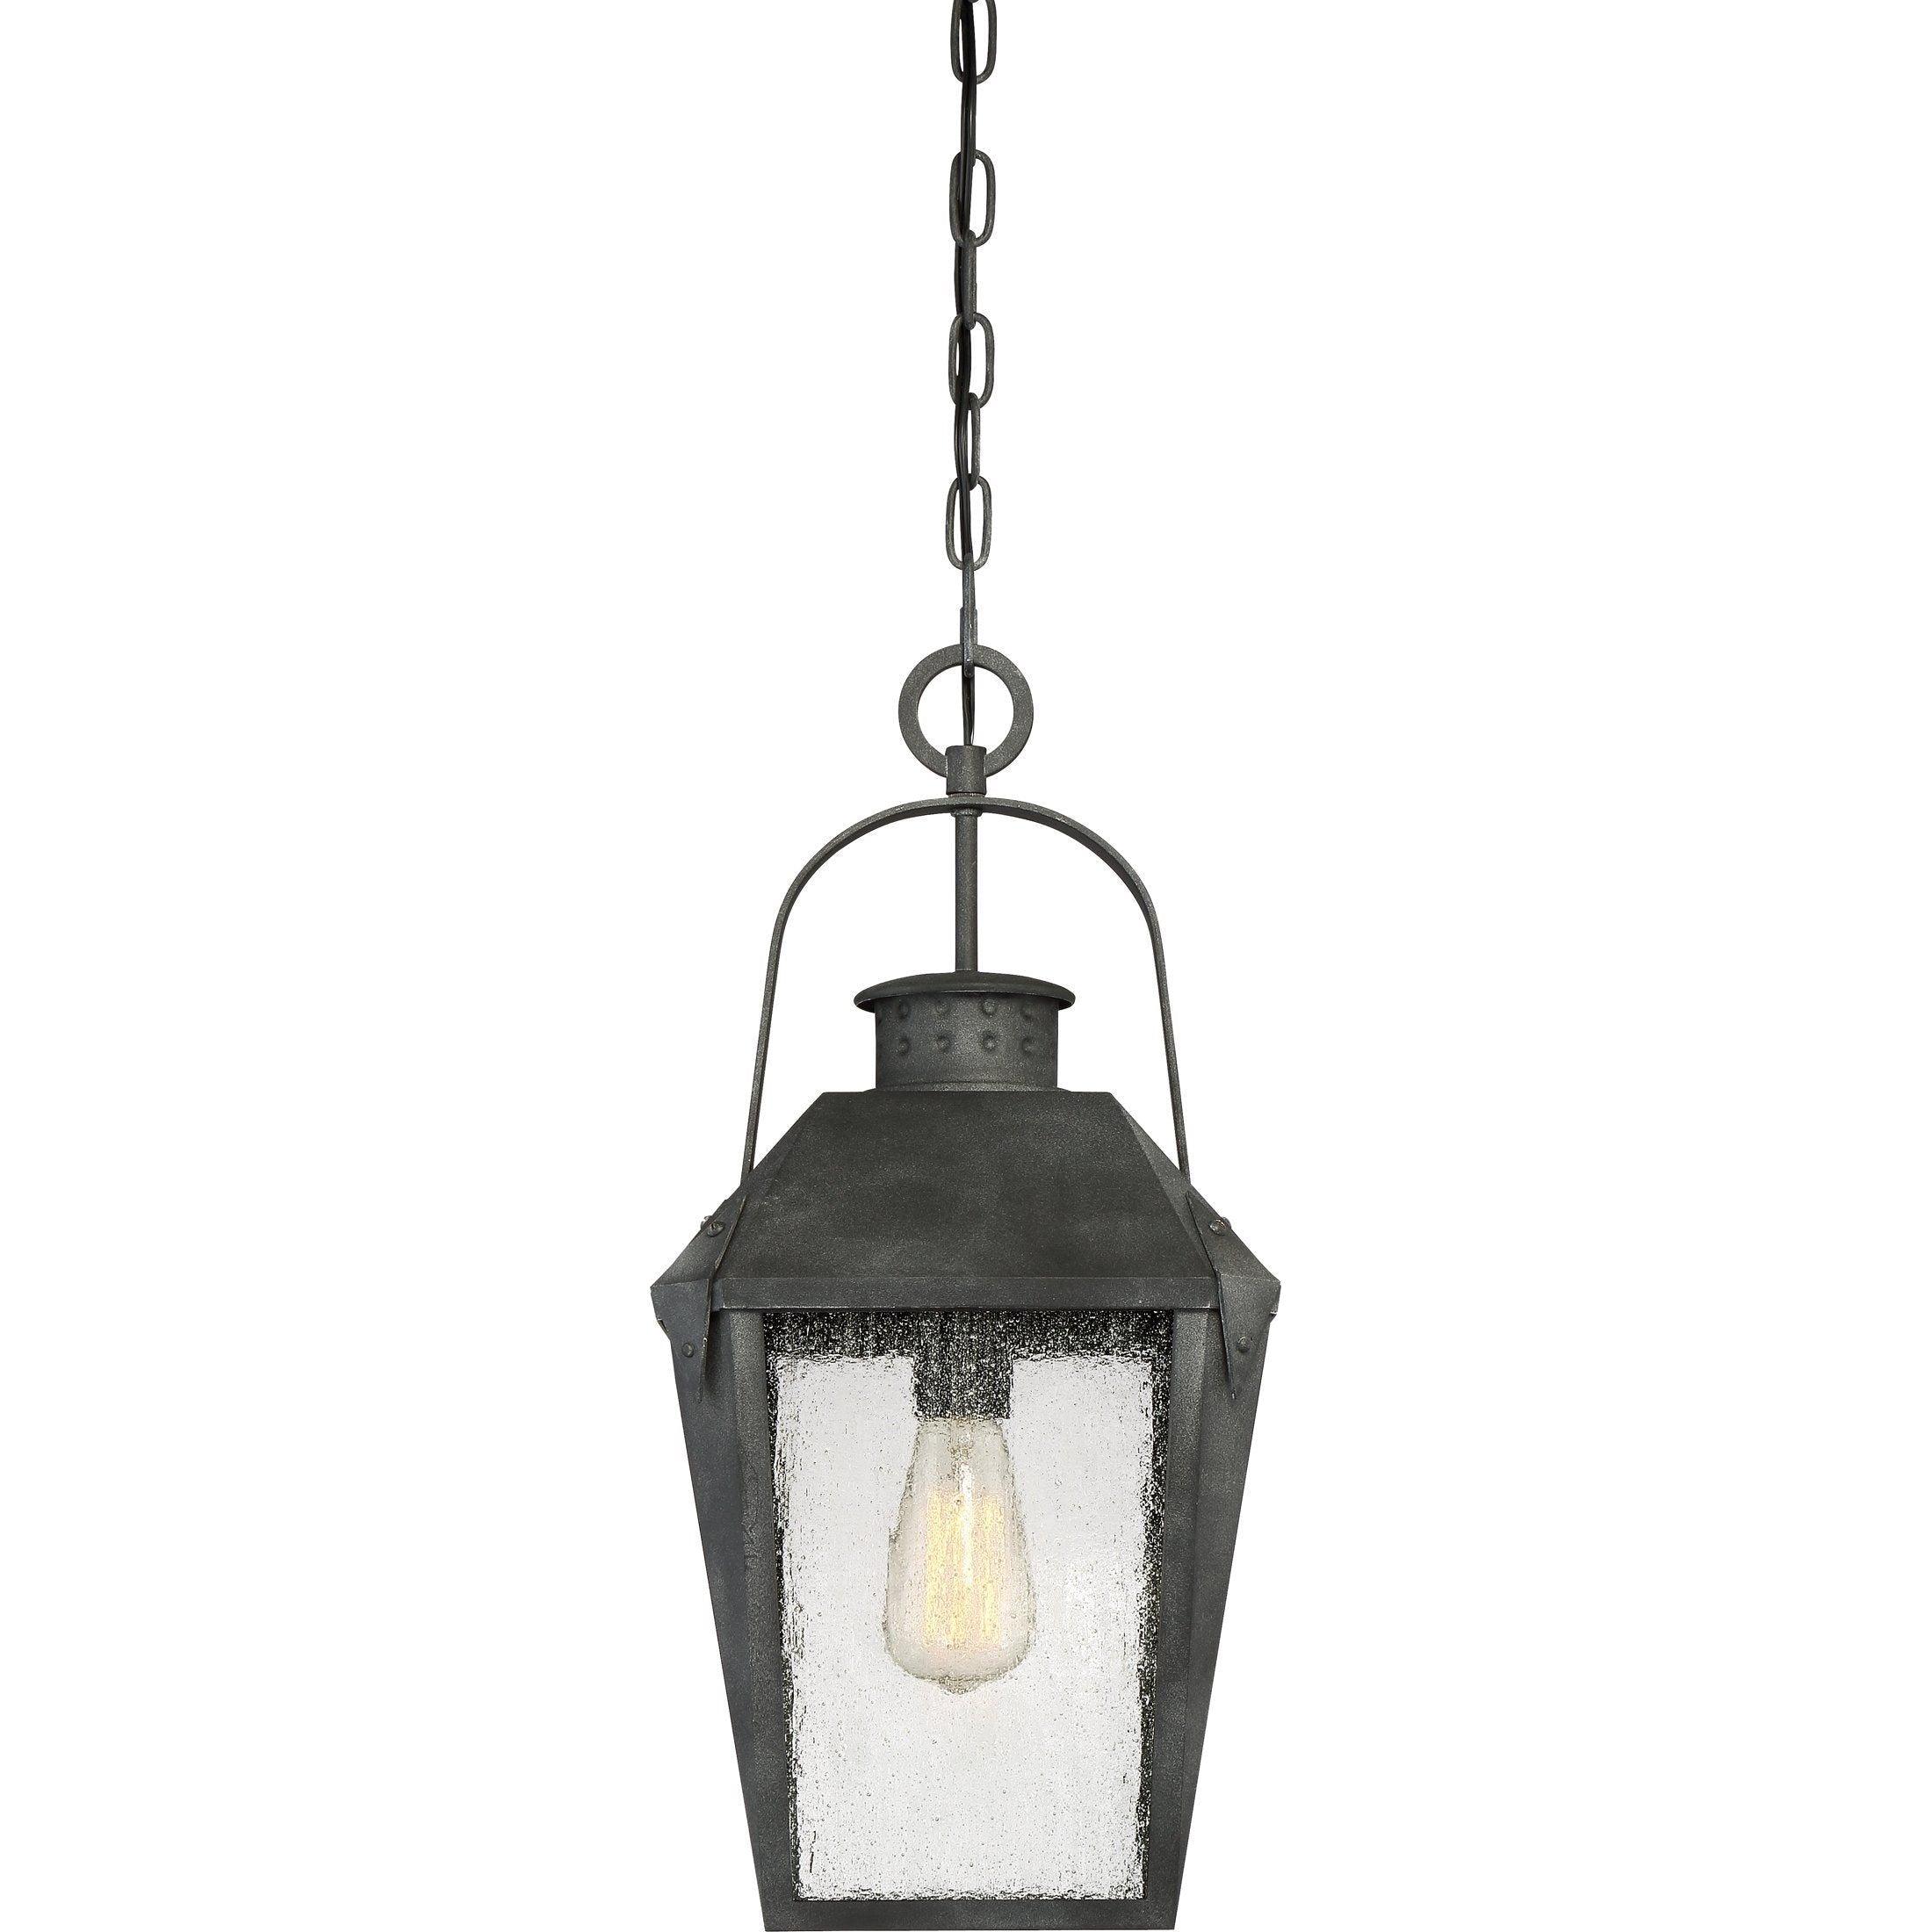 Quoizel - Carriage Outdoor Pendant - Lights Canada